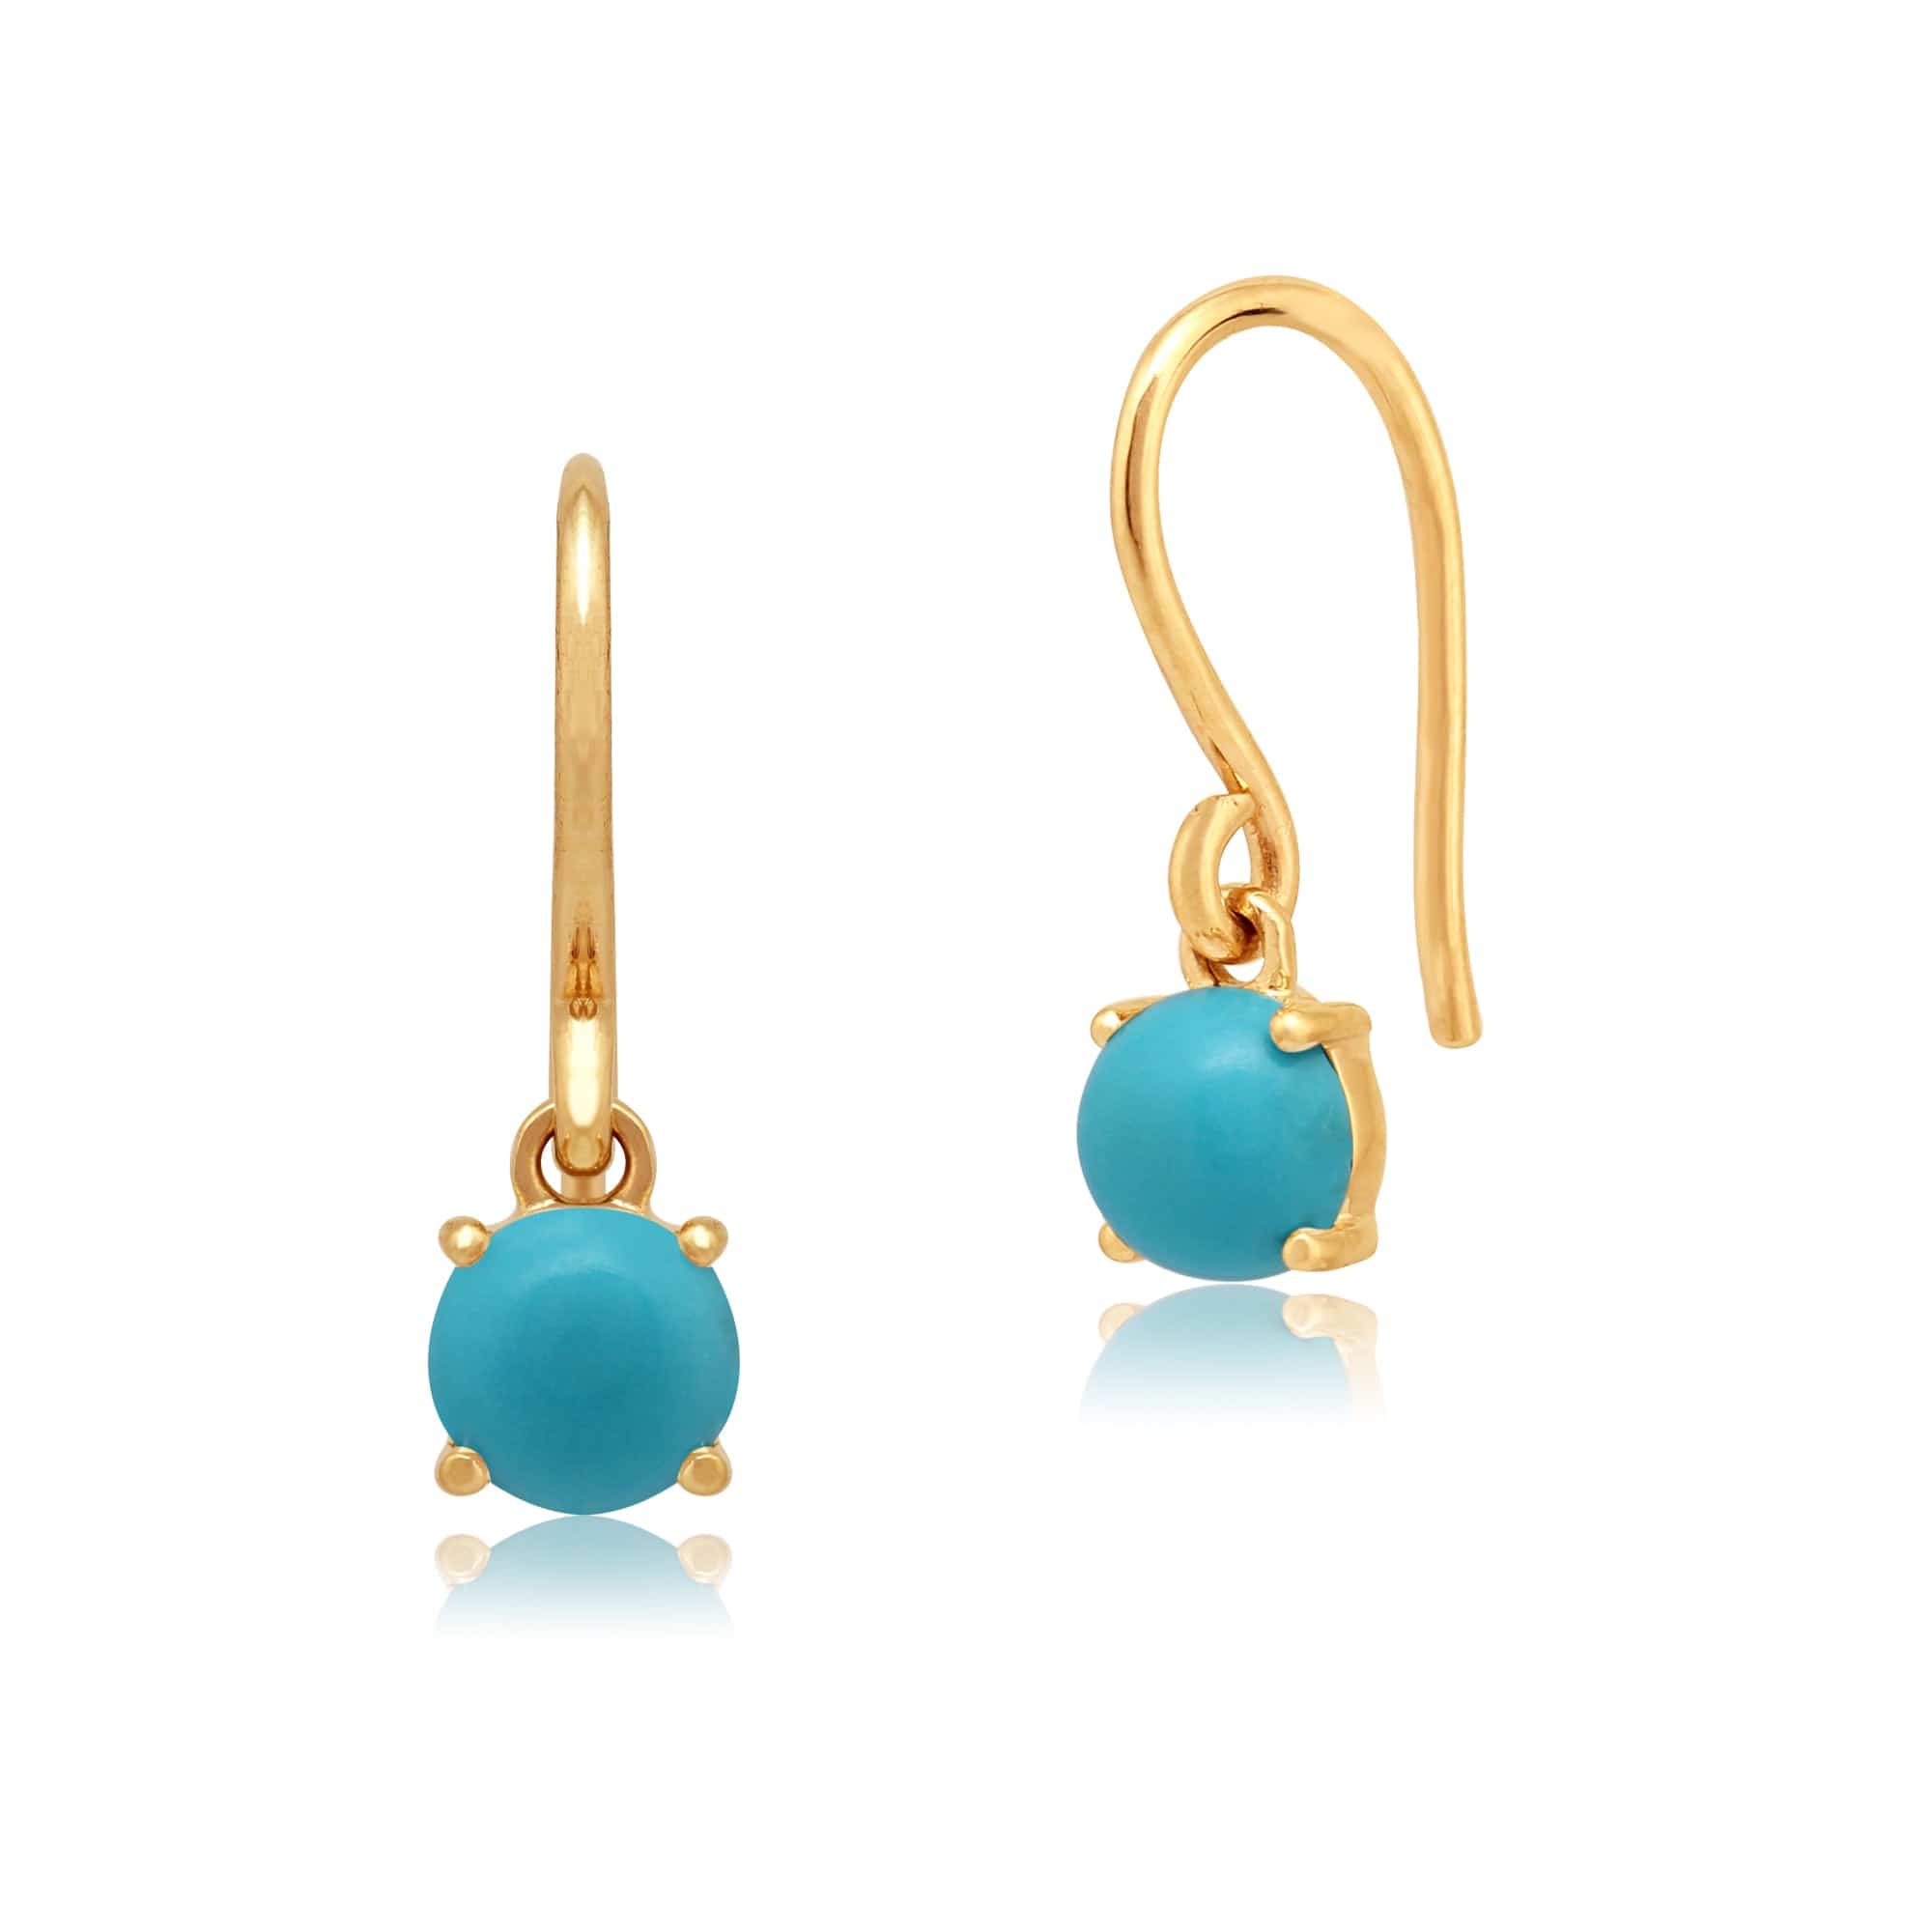 Classic Round Turquoise Cabochon Drop Earrings in 9ct Yellow Gold - Gemondo